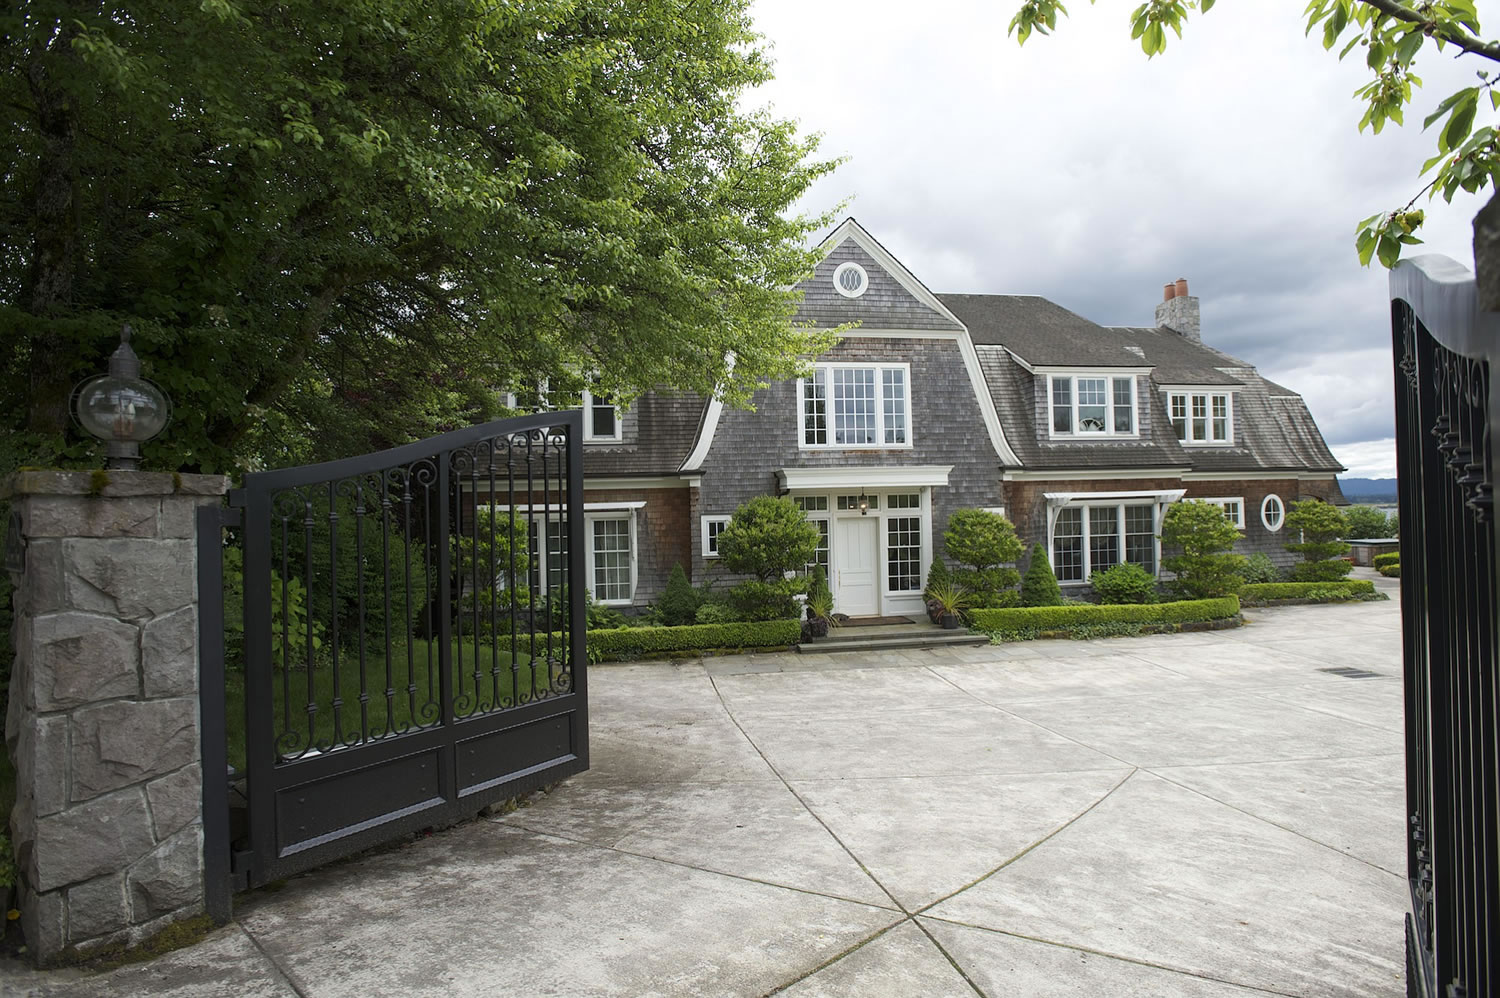 The free Doorways to Luxury home tour, produced by the 55-member Greater Vancouver Luxury Homes Group